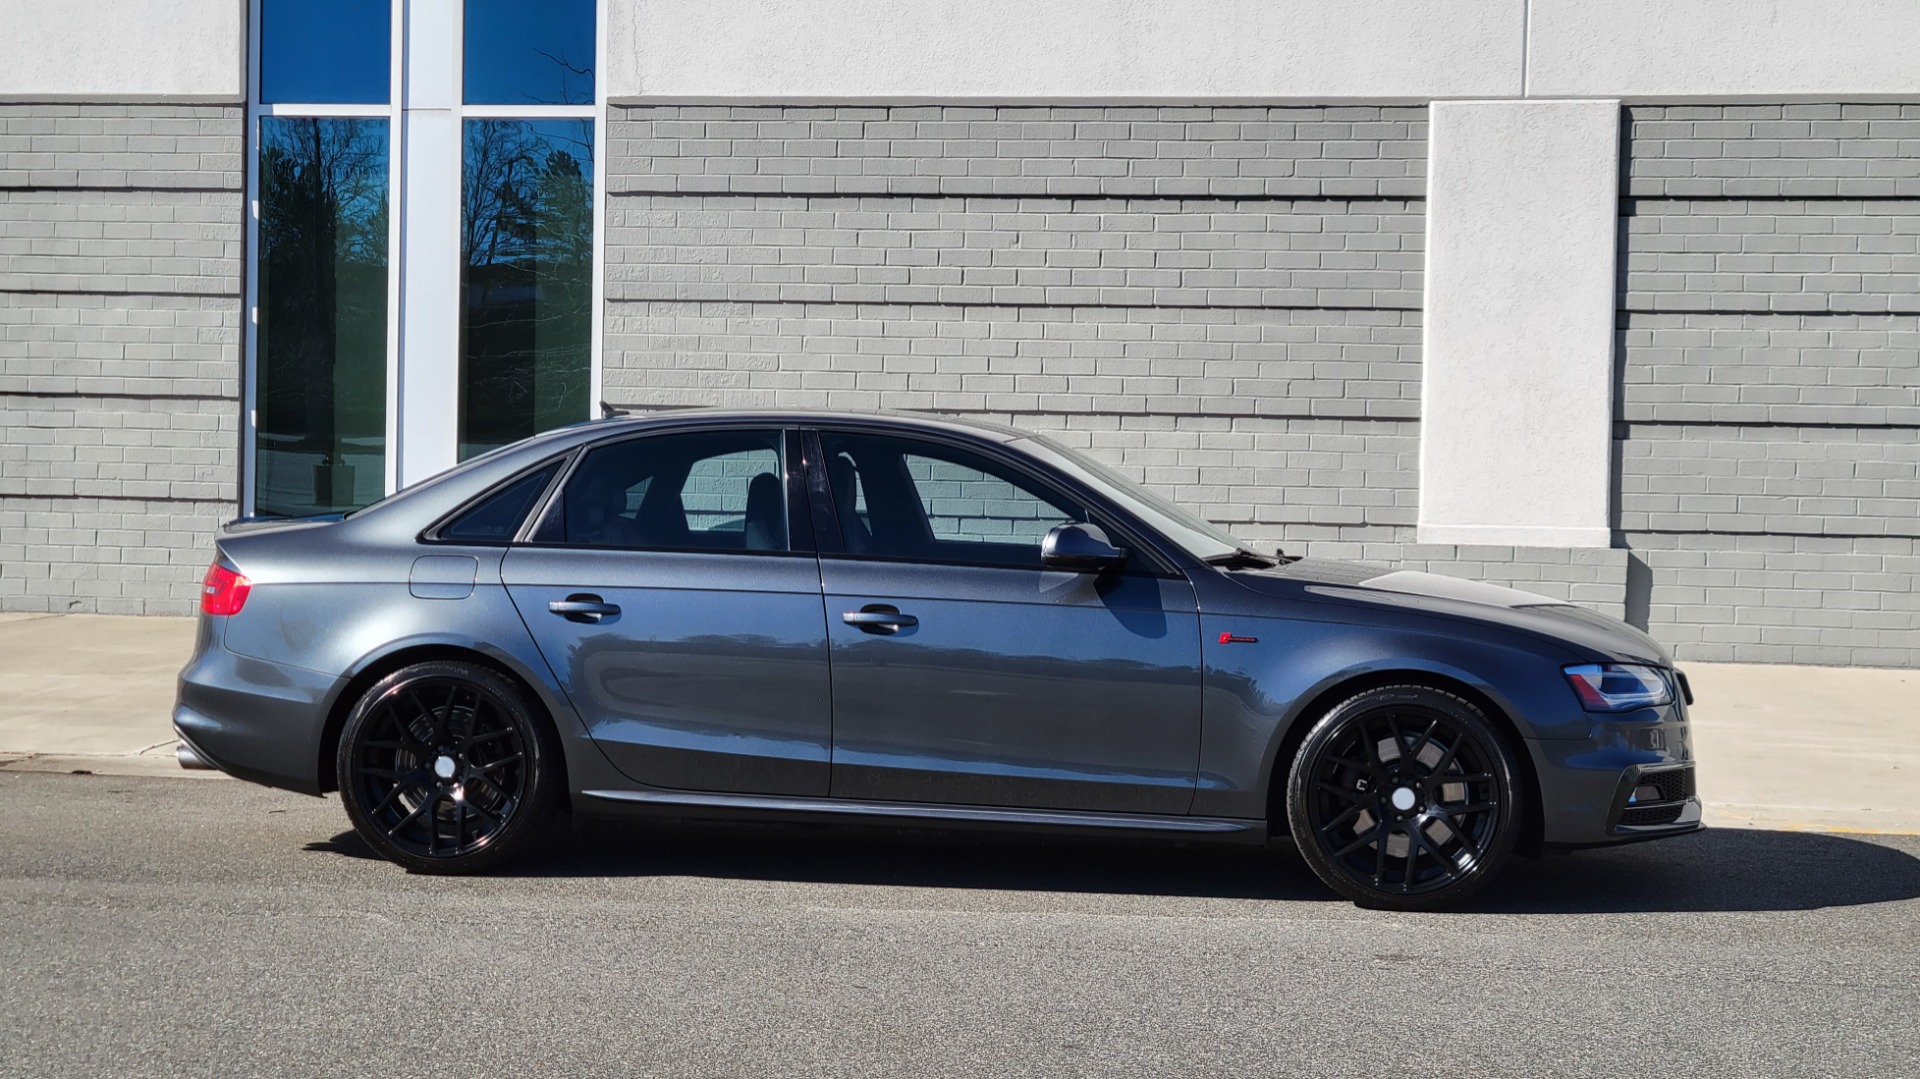 Used 2015 Audi S4 PREMIUM PLUS / TECH PKG / NAV / B&O SOUND / PARK SYS W/REARVIEW for sale Sold at Formula Imports in Charlotte NC 28227 12